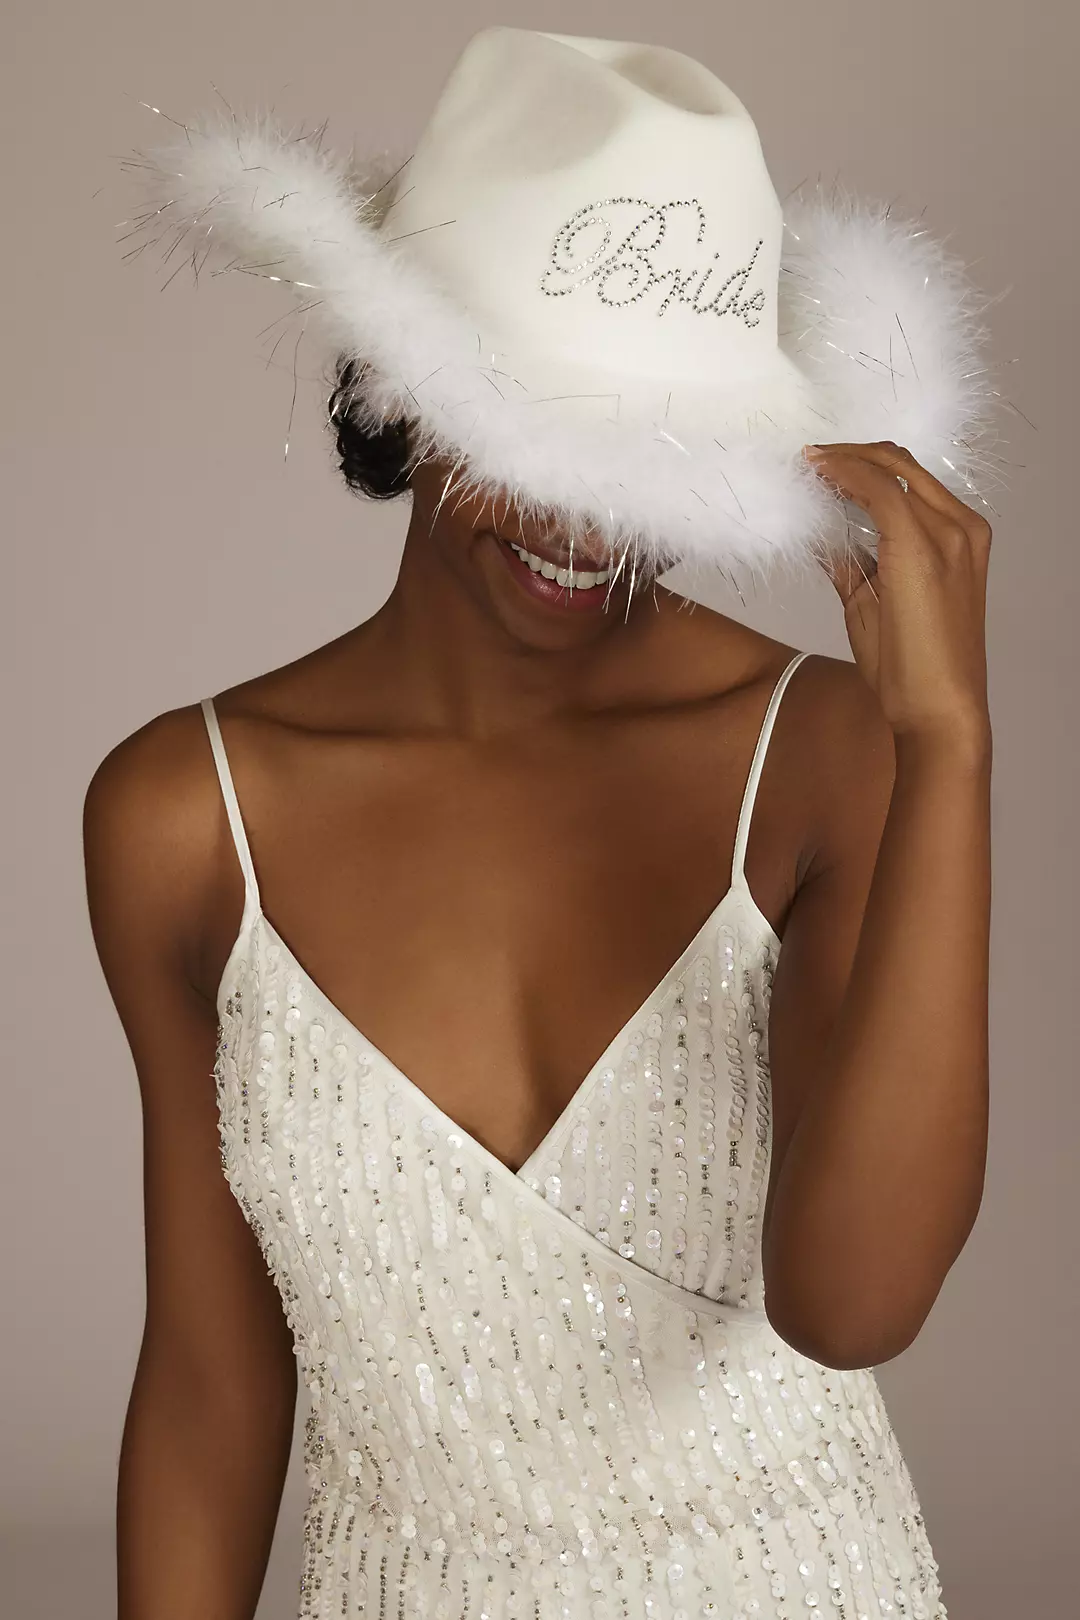 Feather-Trimmed Bride Cowgirl Hat Image